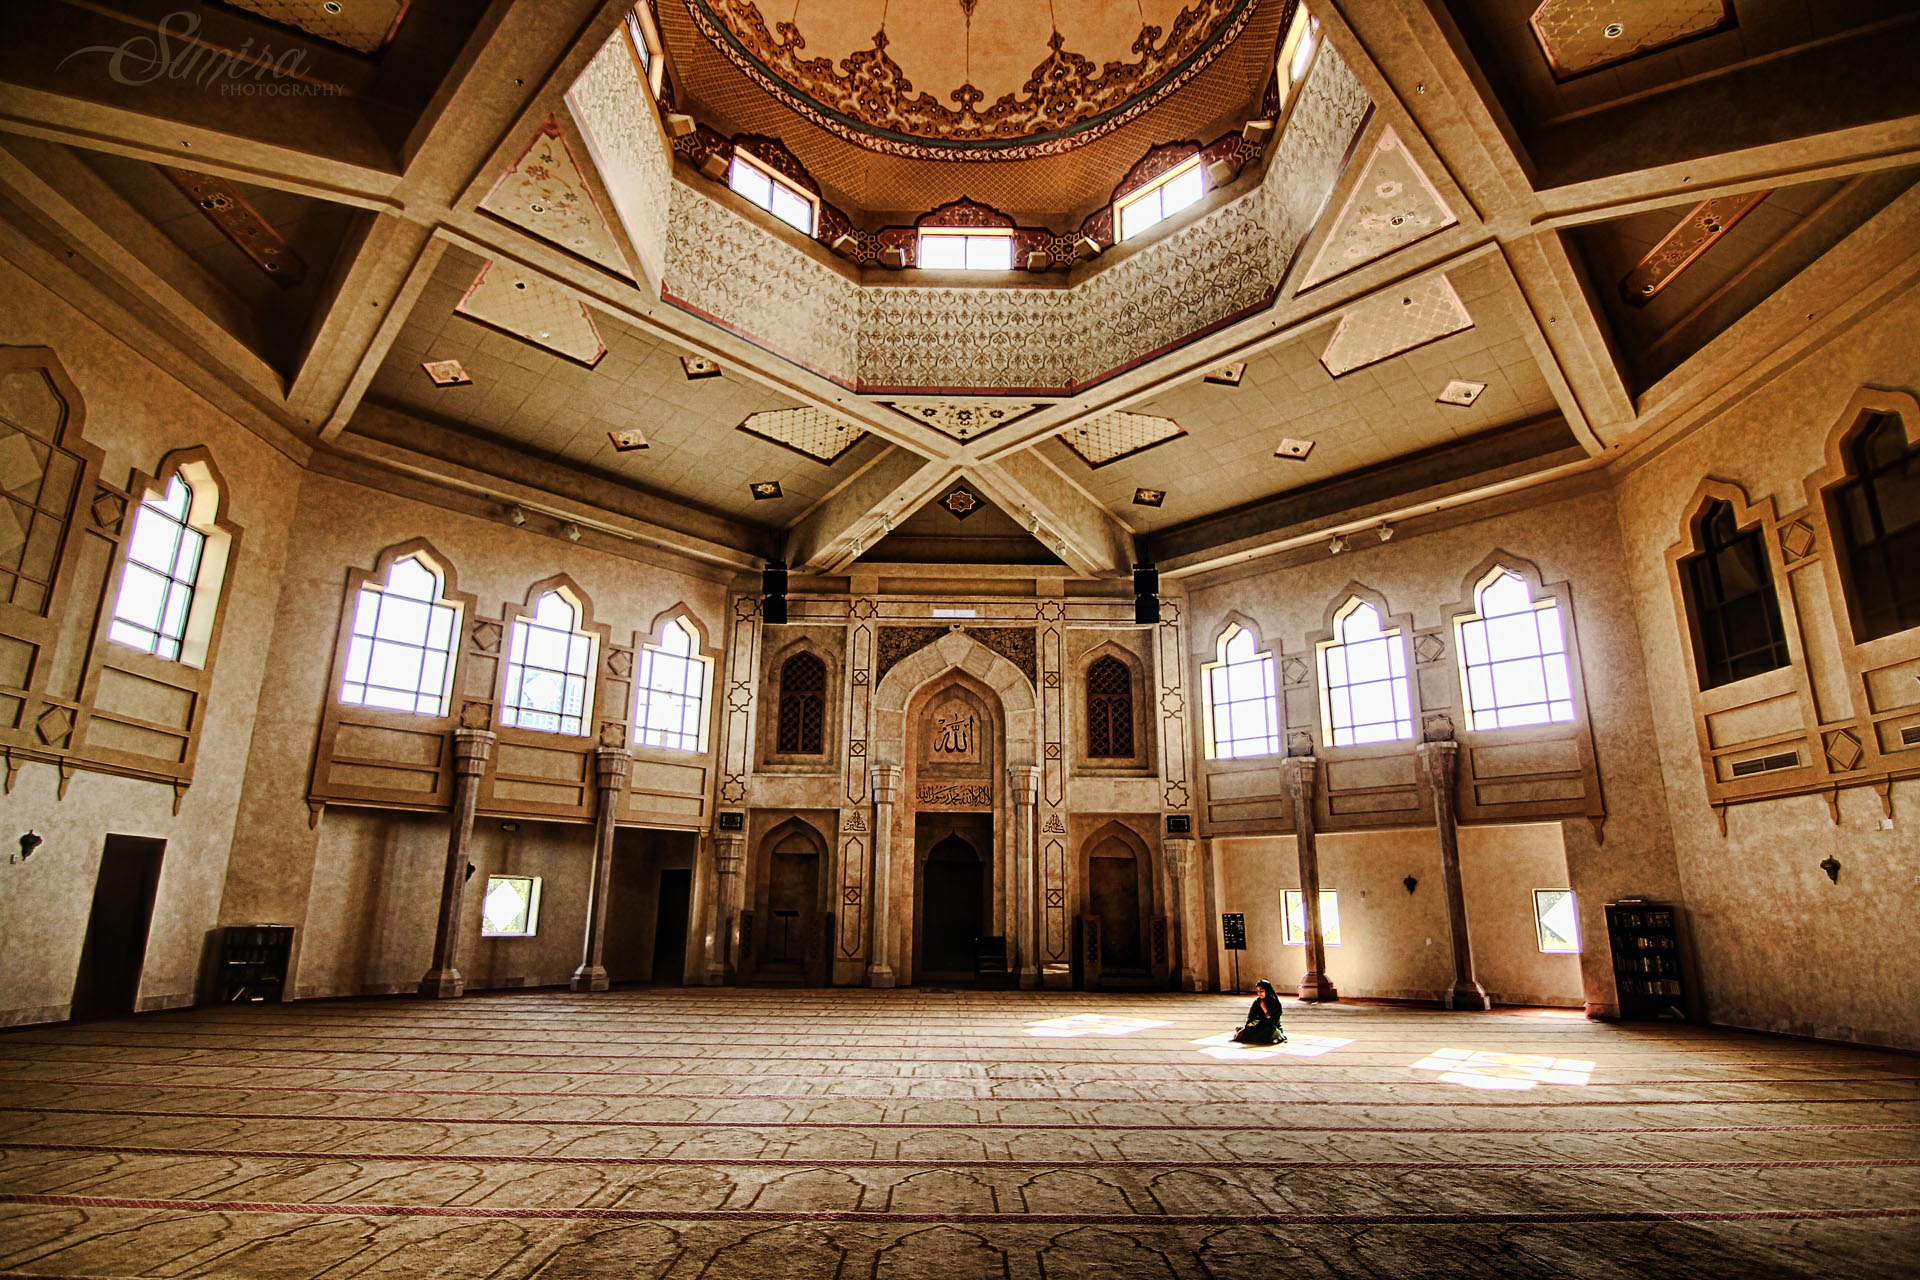 The Most Beautiful Mosques In America